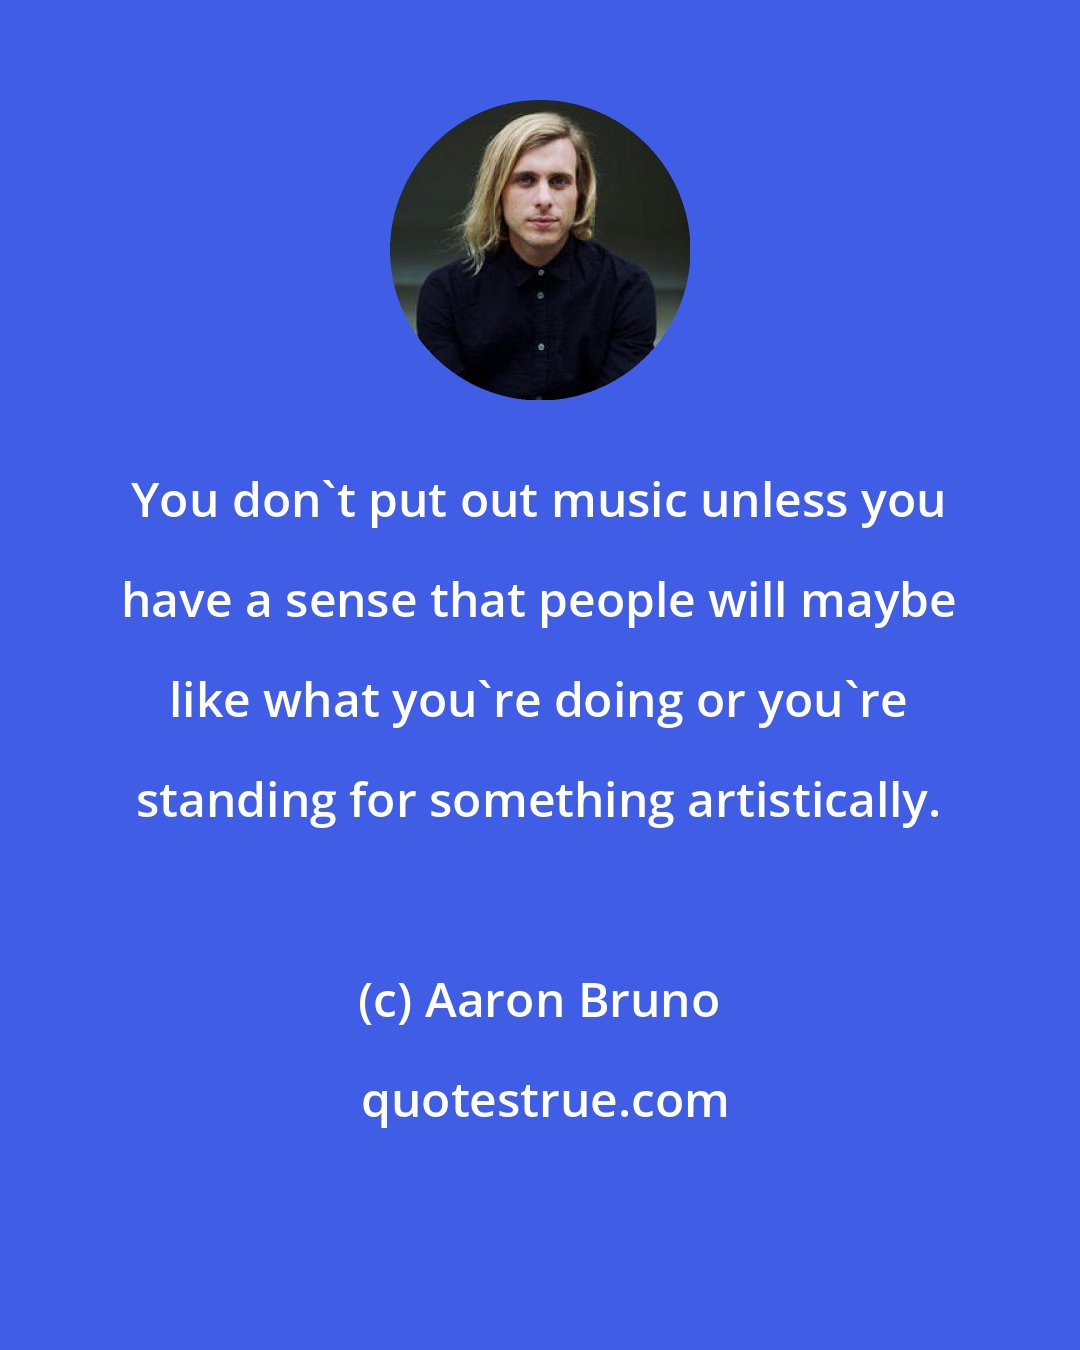 Aaron Bruno: You don't put out music unless you have a sense that people will maybe like what you're doing or you're standing for something artistically.